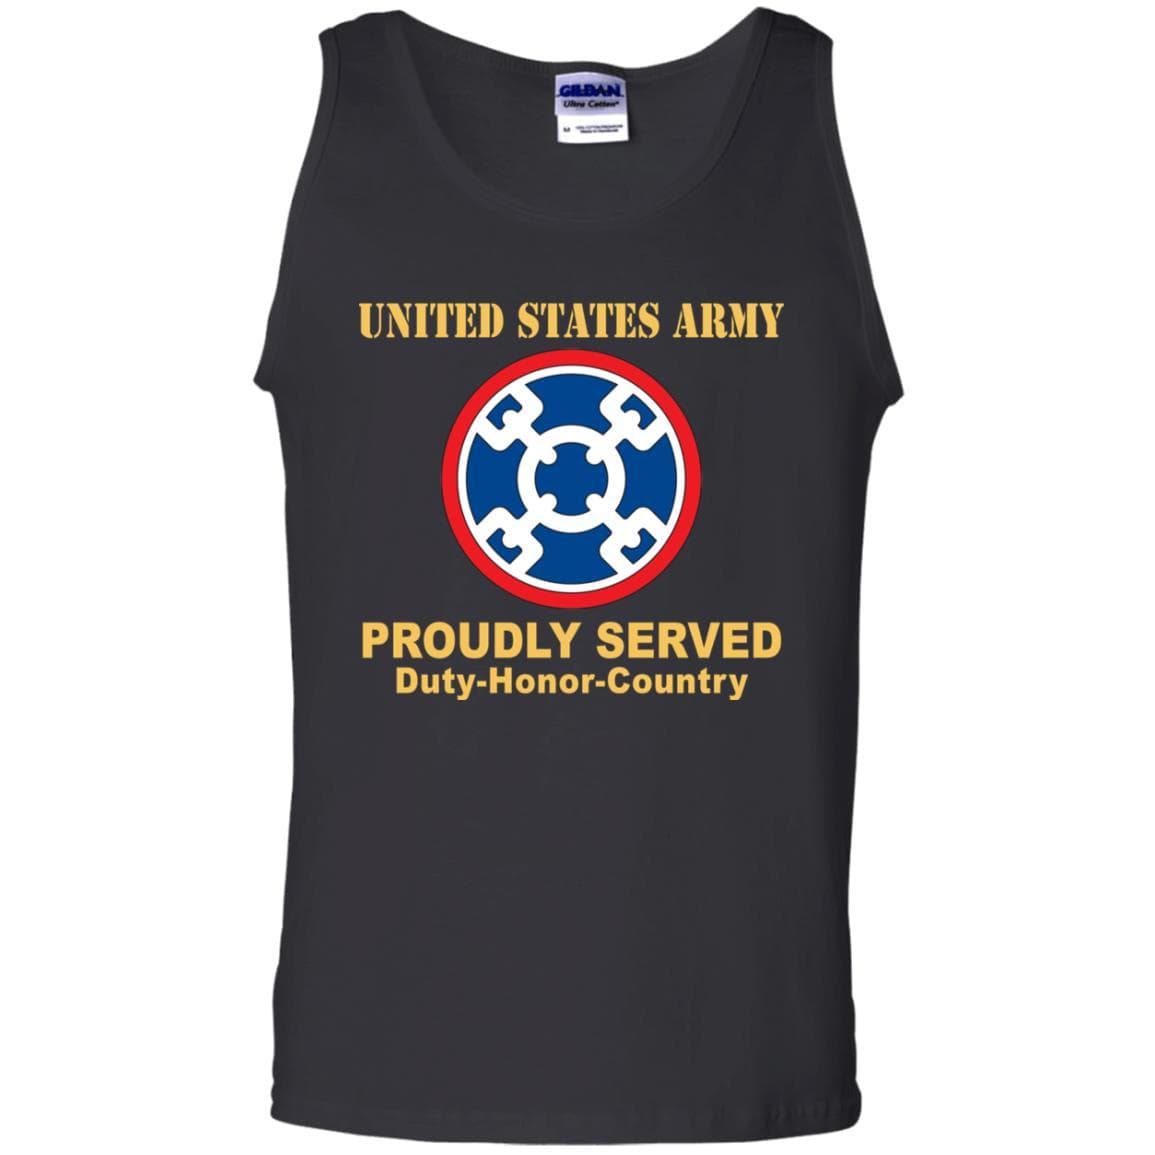 US ARMY 310TH SUSTAINMENT COMMAND- Proudly Served T-Shirt On Front For Men-TShirt-Army-Veterans Nation